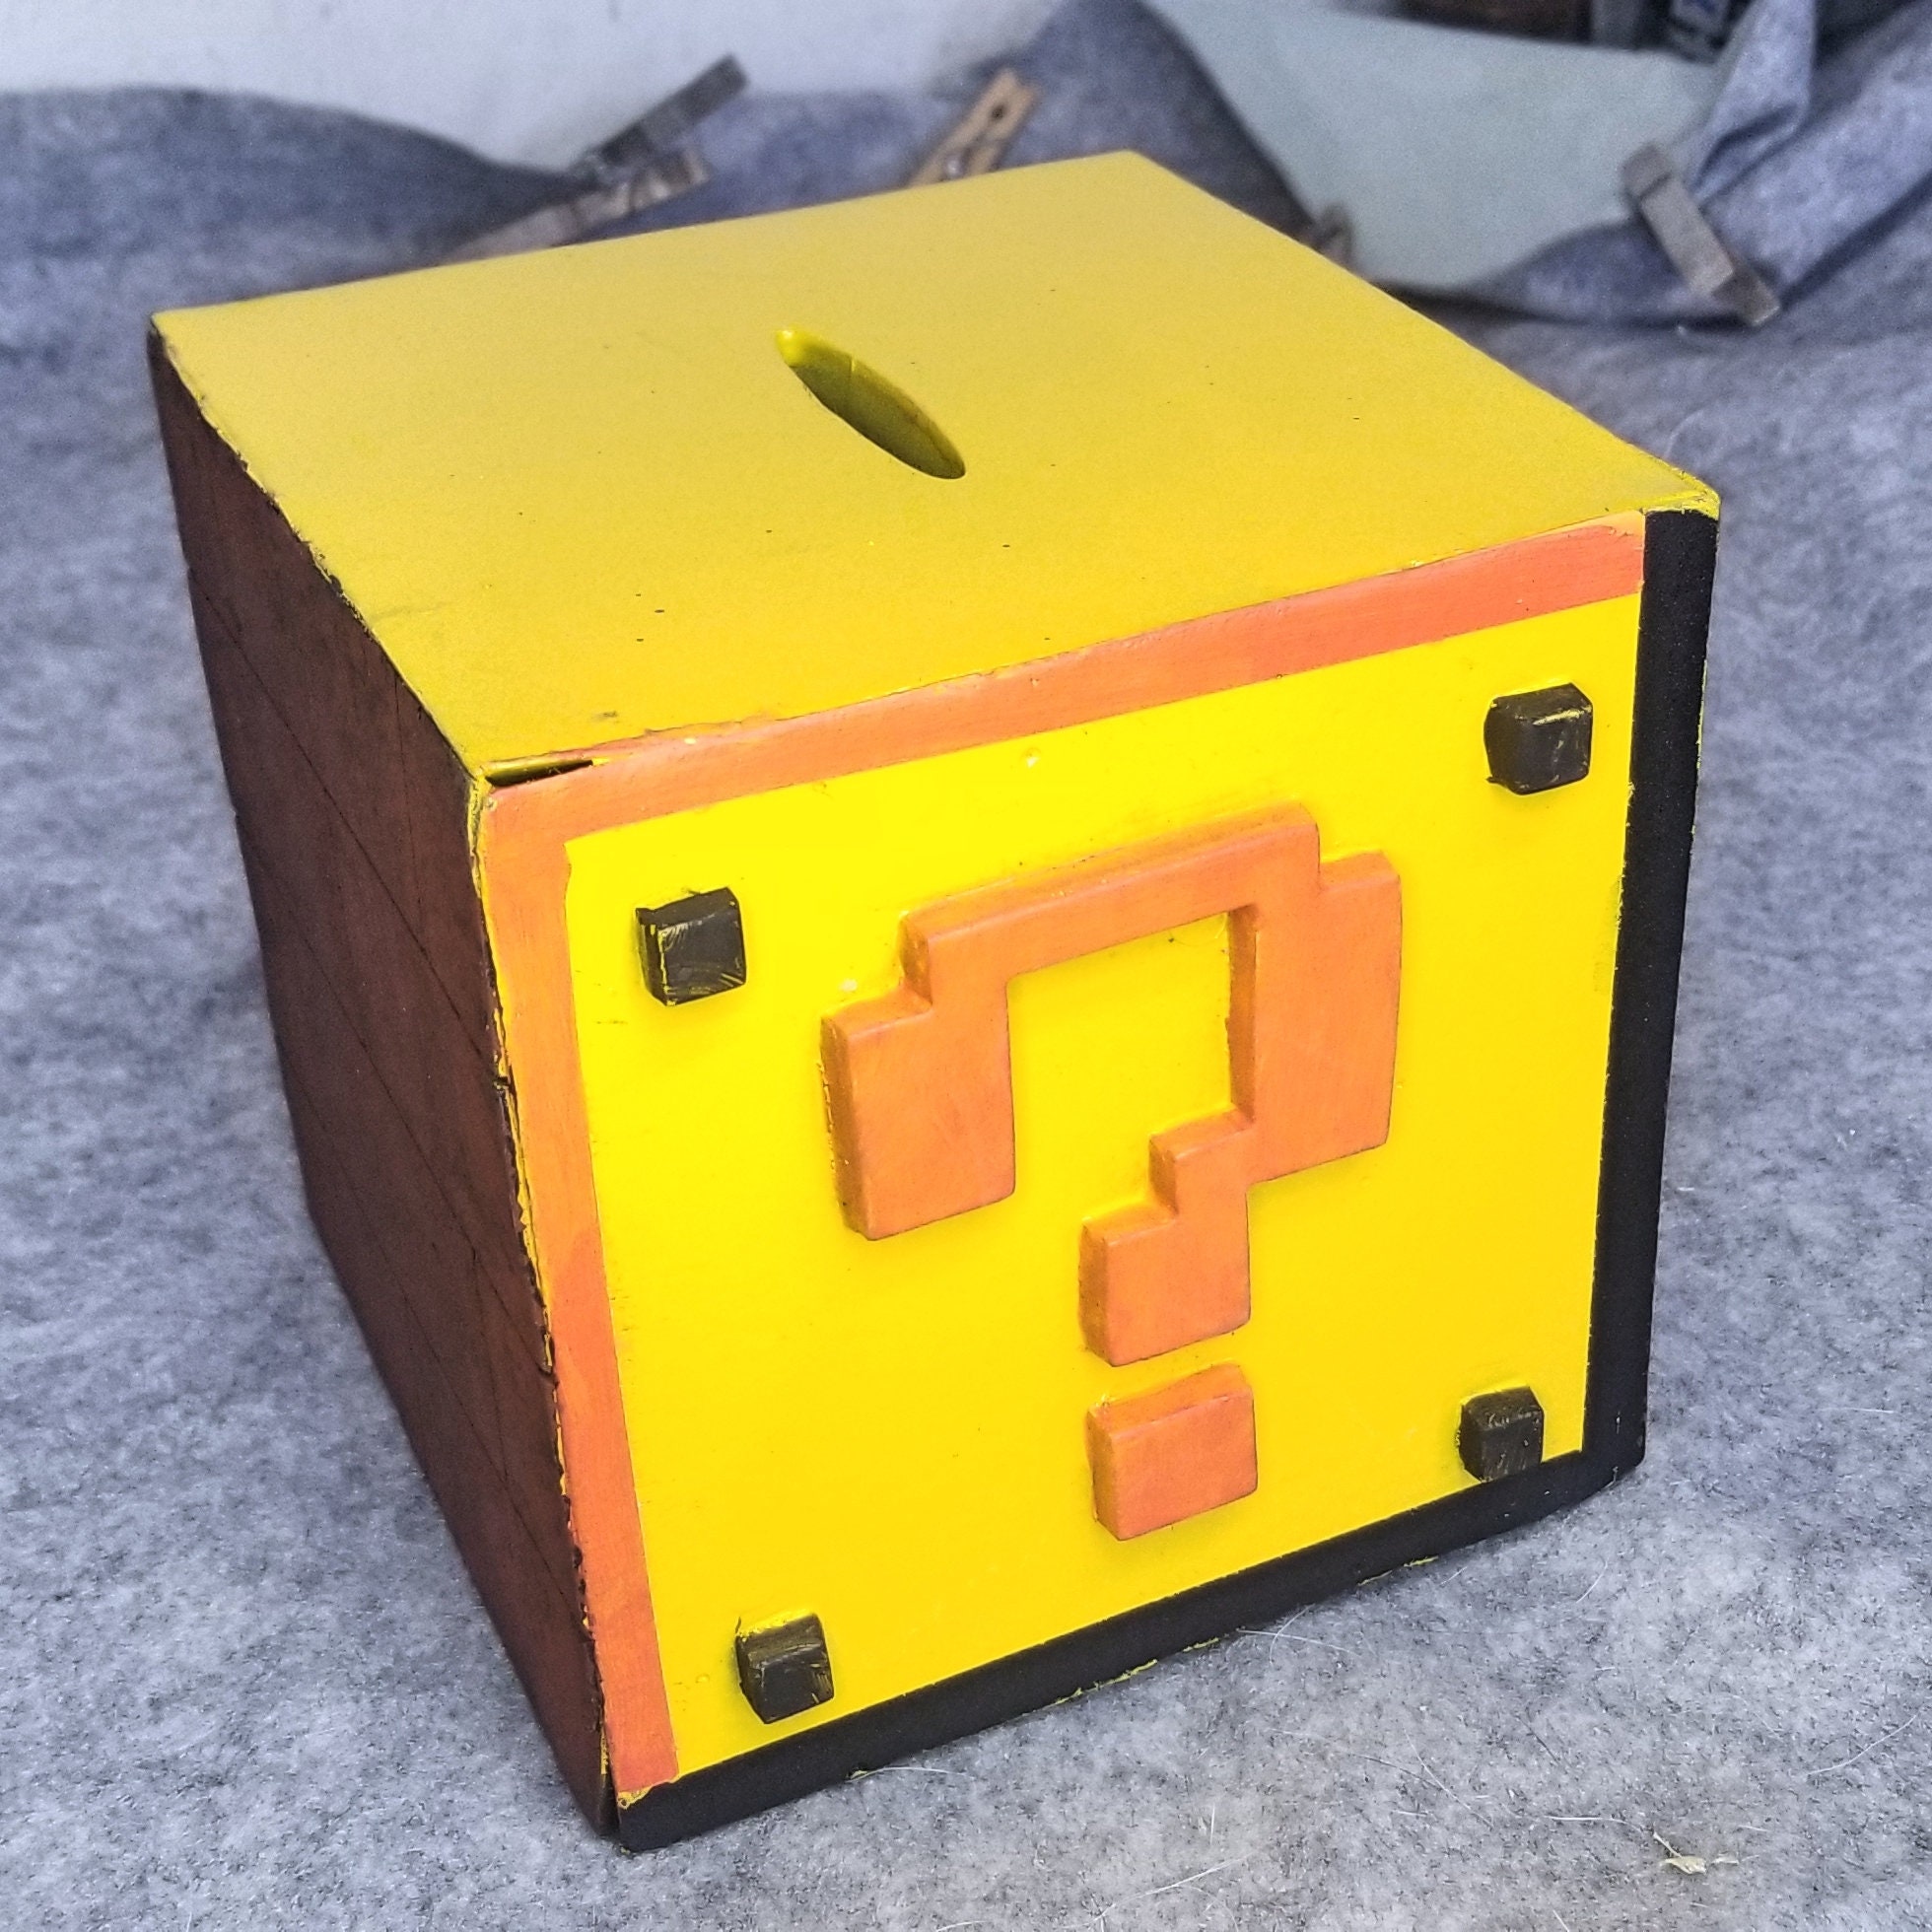 Super Mario Lucky Block Coin Block ? Candy Strawberry Flavoured Gold Coins  Inside 34g Block